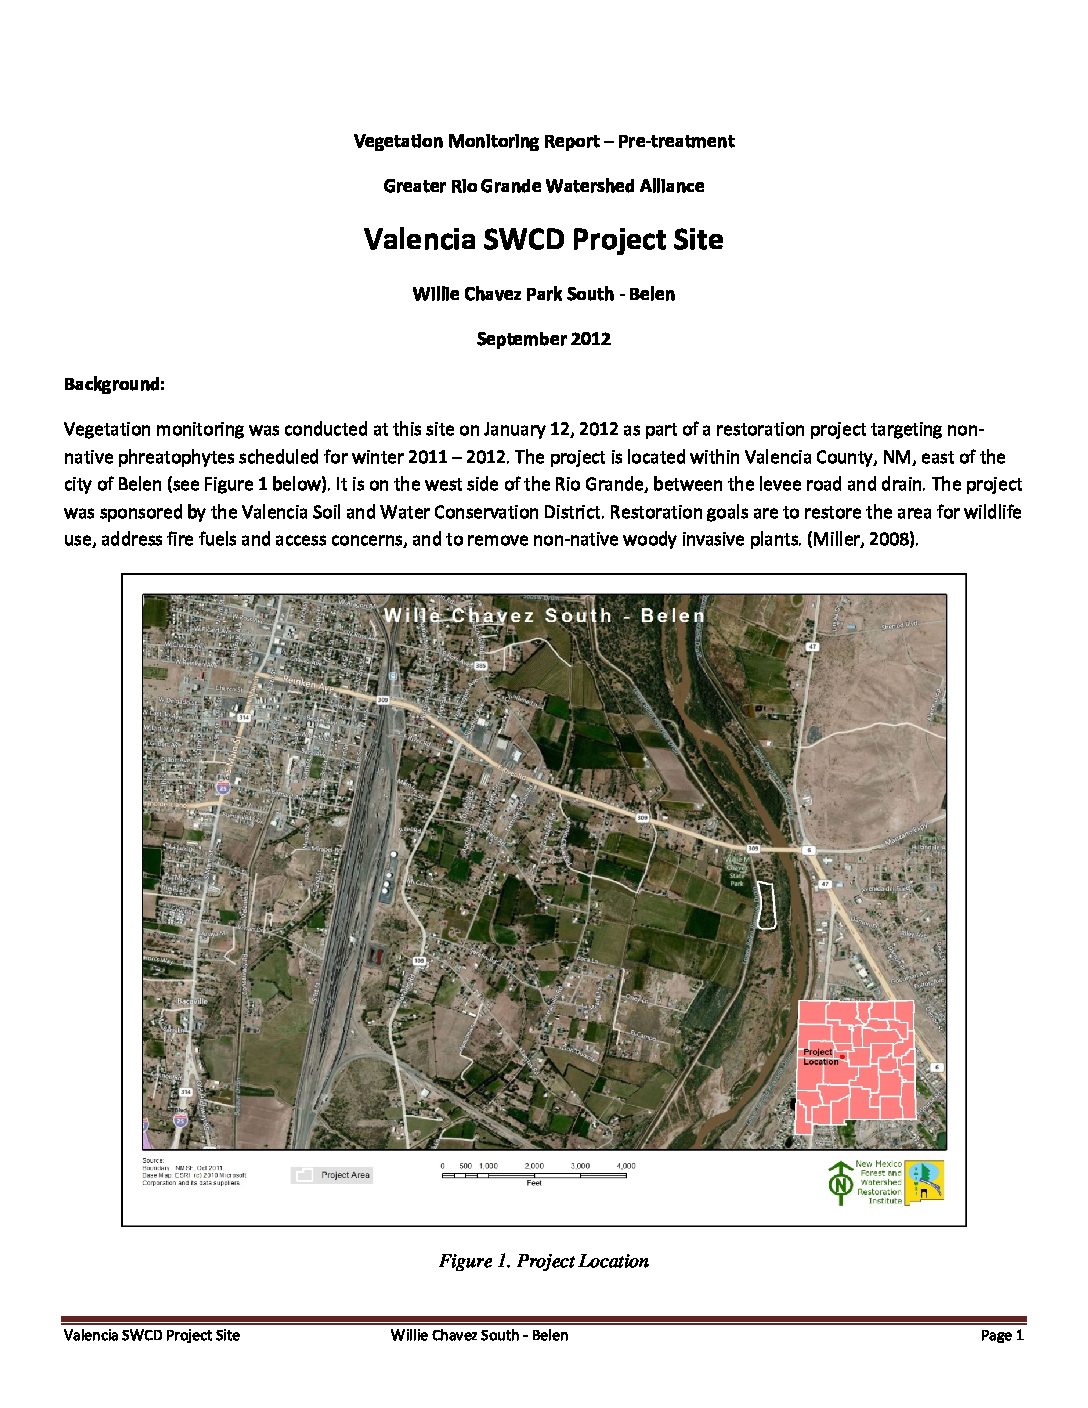 Willie Chavez Park South - Belen, Valencia SWCD, Pre-Treatment Monitoring, 2012